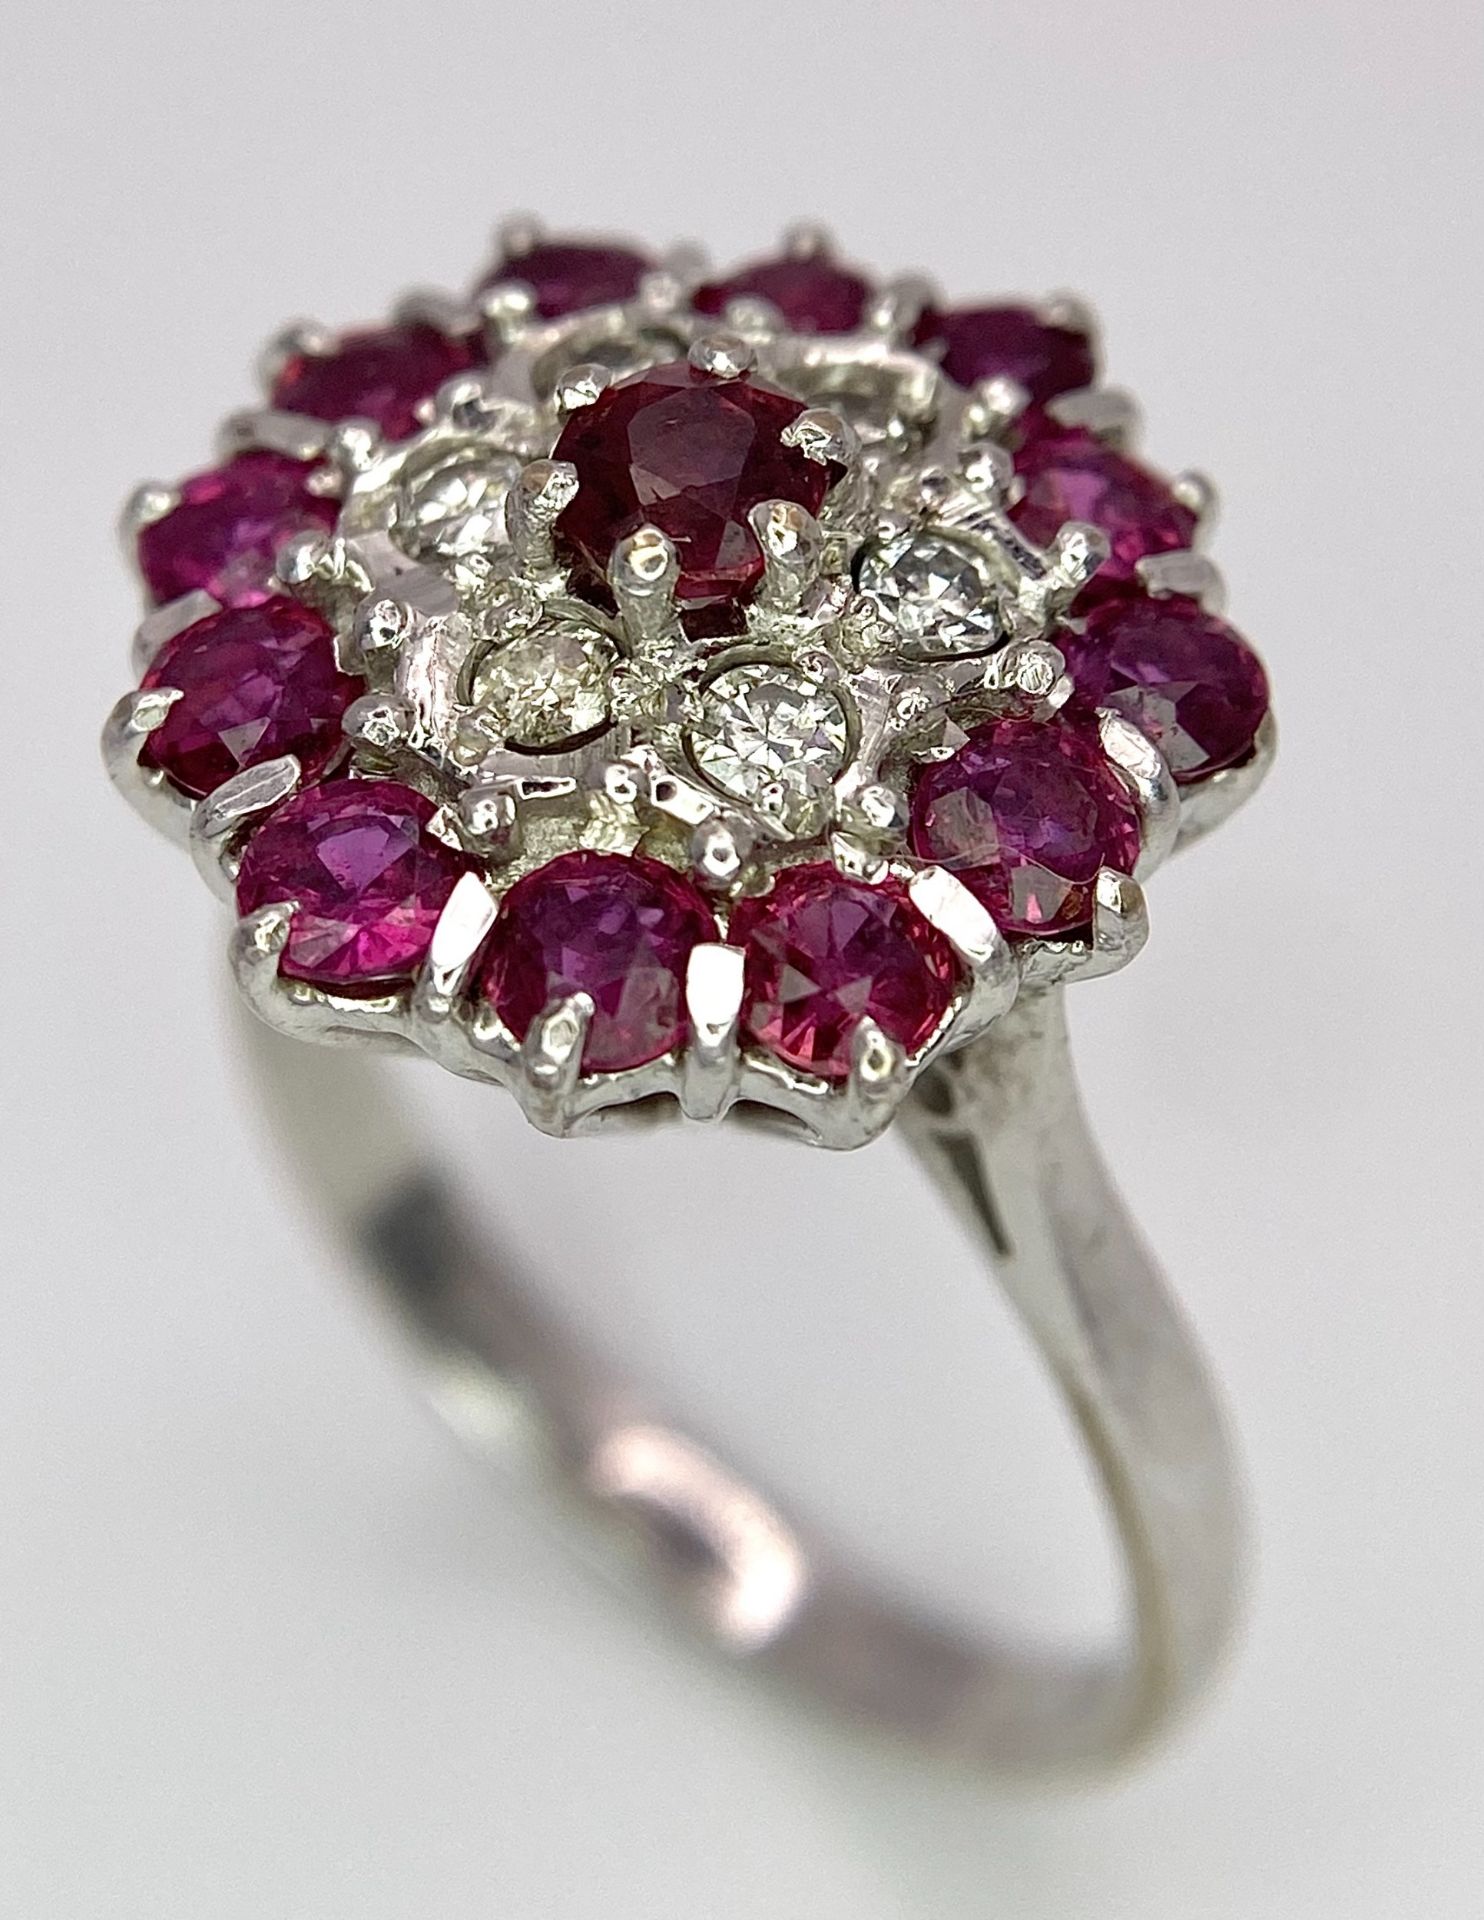 A Gorgeous 18K White Gold, Ruby and Diamond Ring. Floral design on an elevated setting. 14 rubies - Bild 4 aus 6